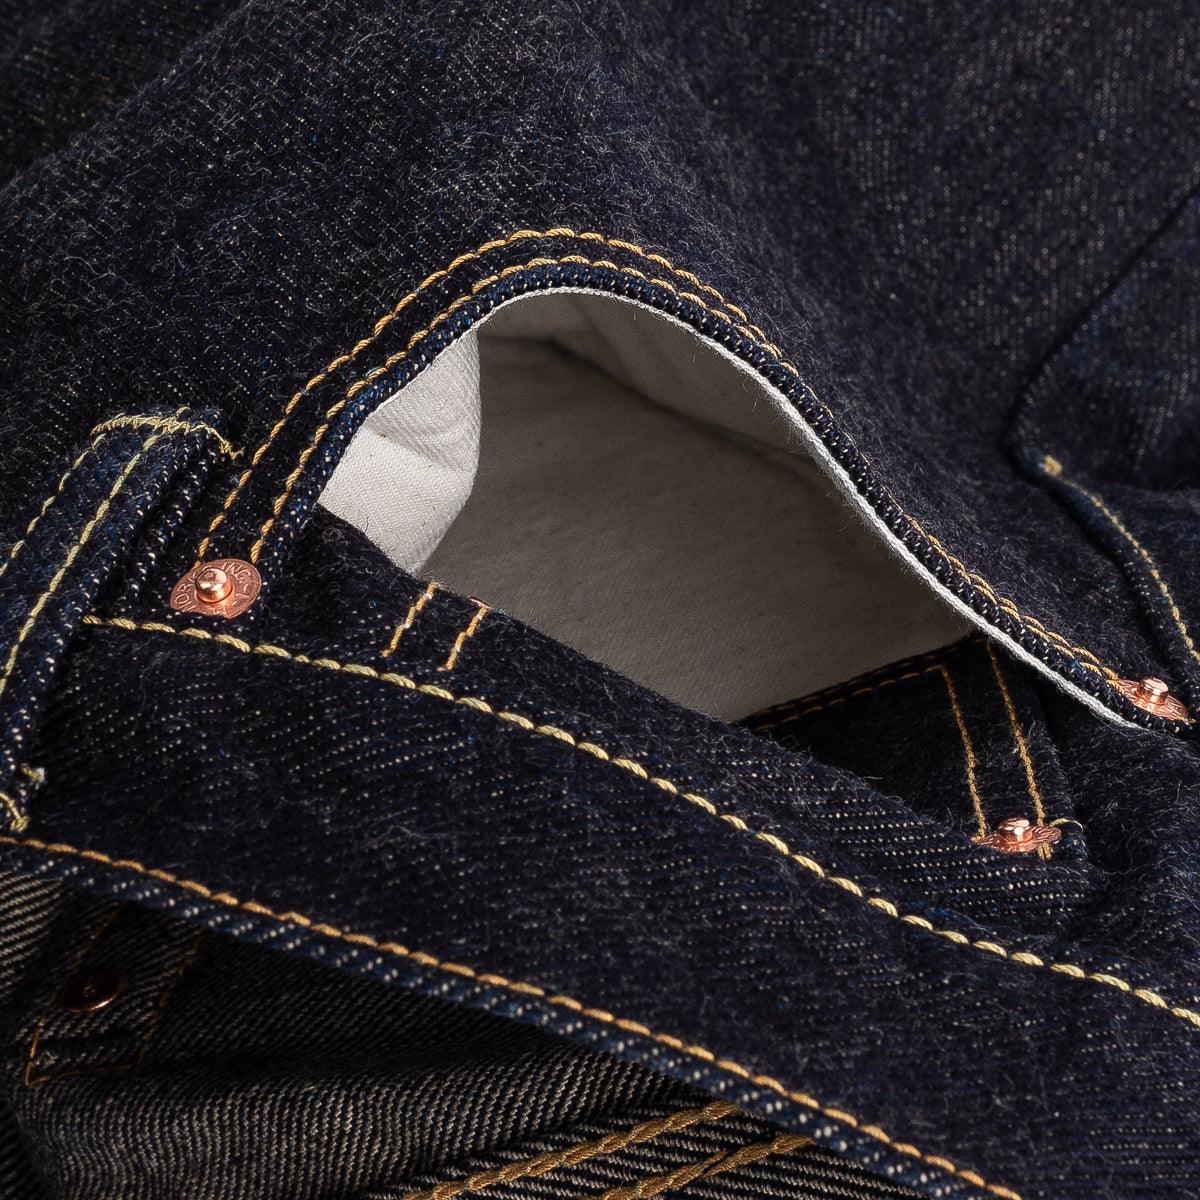 Image showing the IH-666S-19L - 19oz Left Hand Twill Selvedge Denim Slim Straight Cut Jeans Indigo which is a Jeans described by the following info 666, Bottoms, IHSALE_M23, Iron Heart, Jeans, Released, Straight and sold on the IRON HEART GERMANY online store